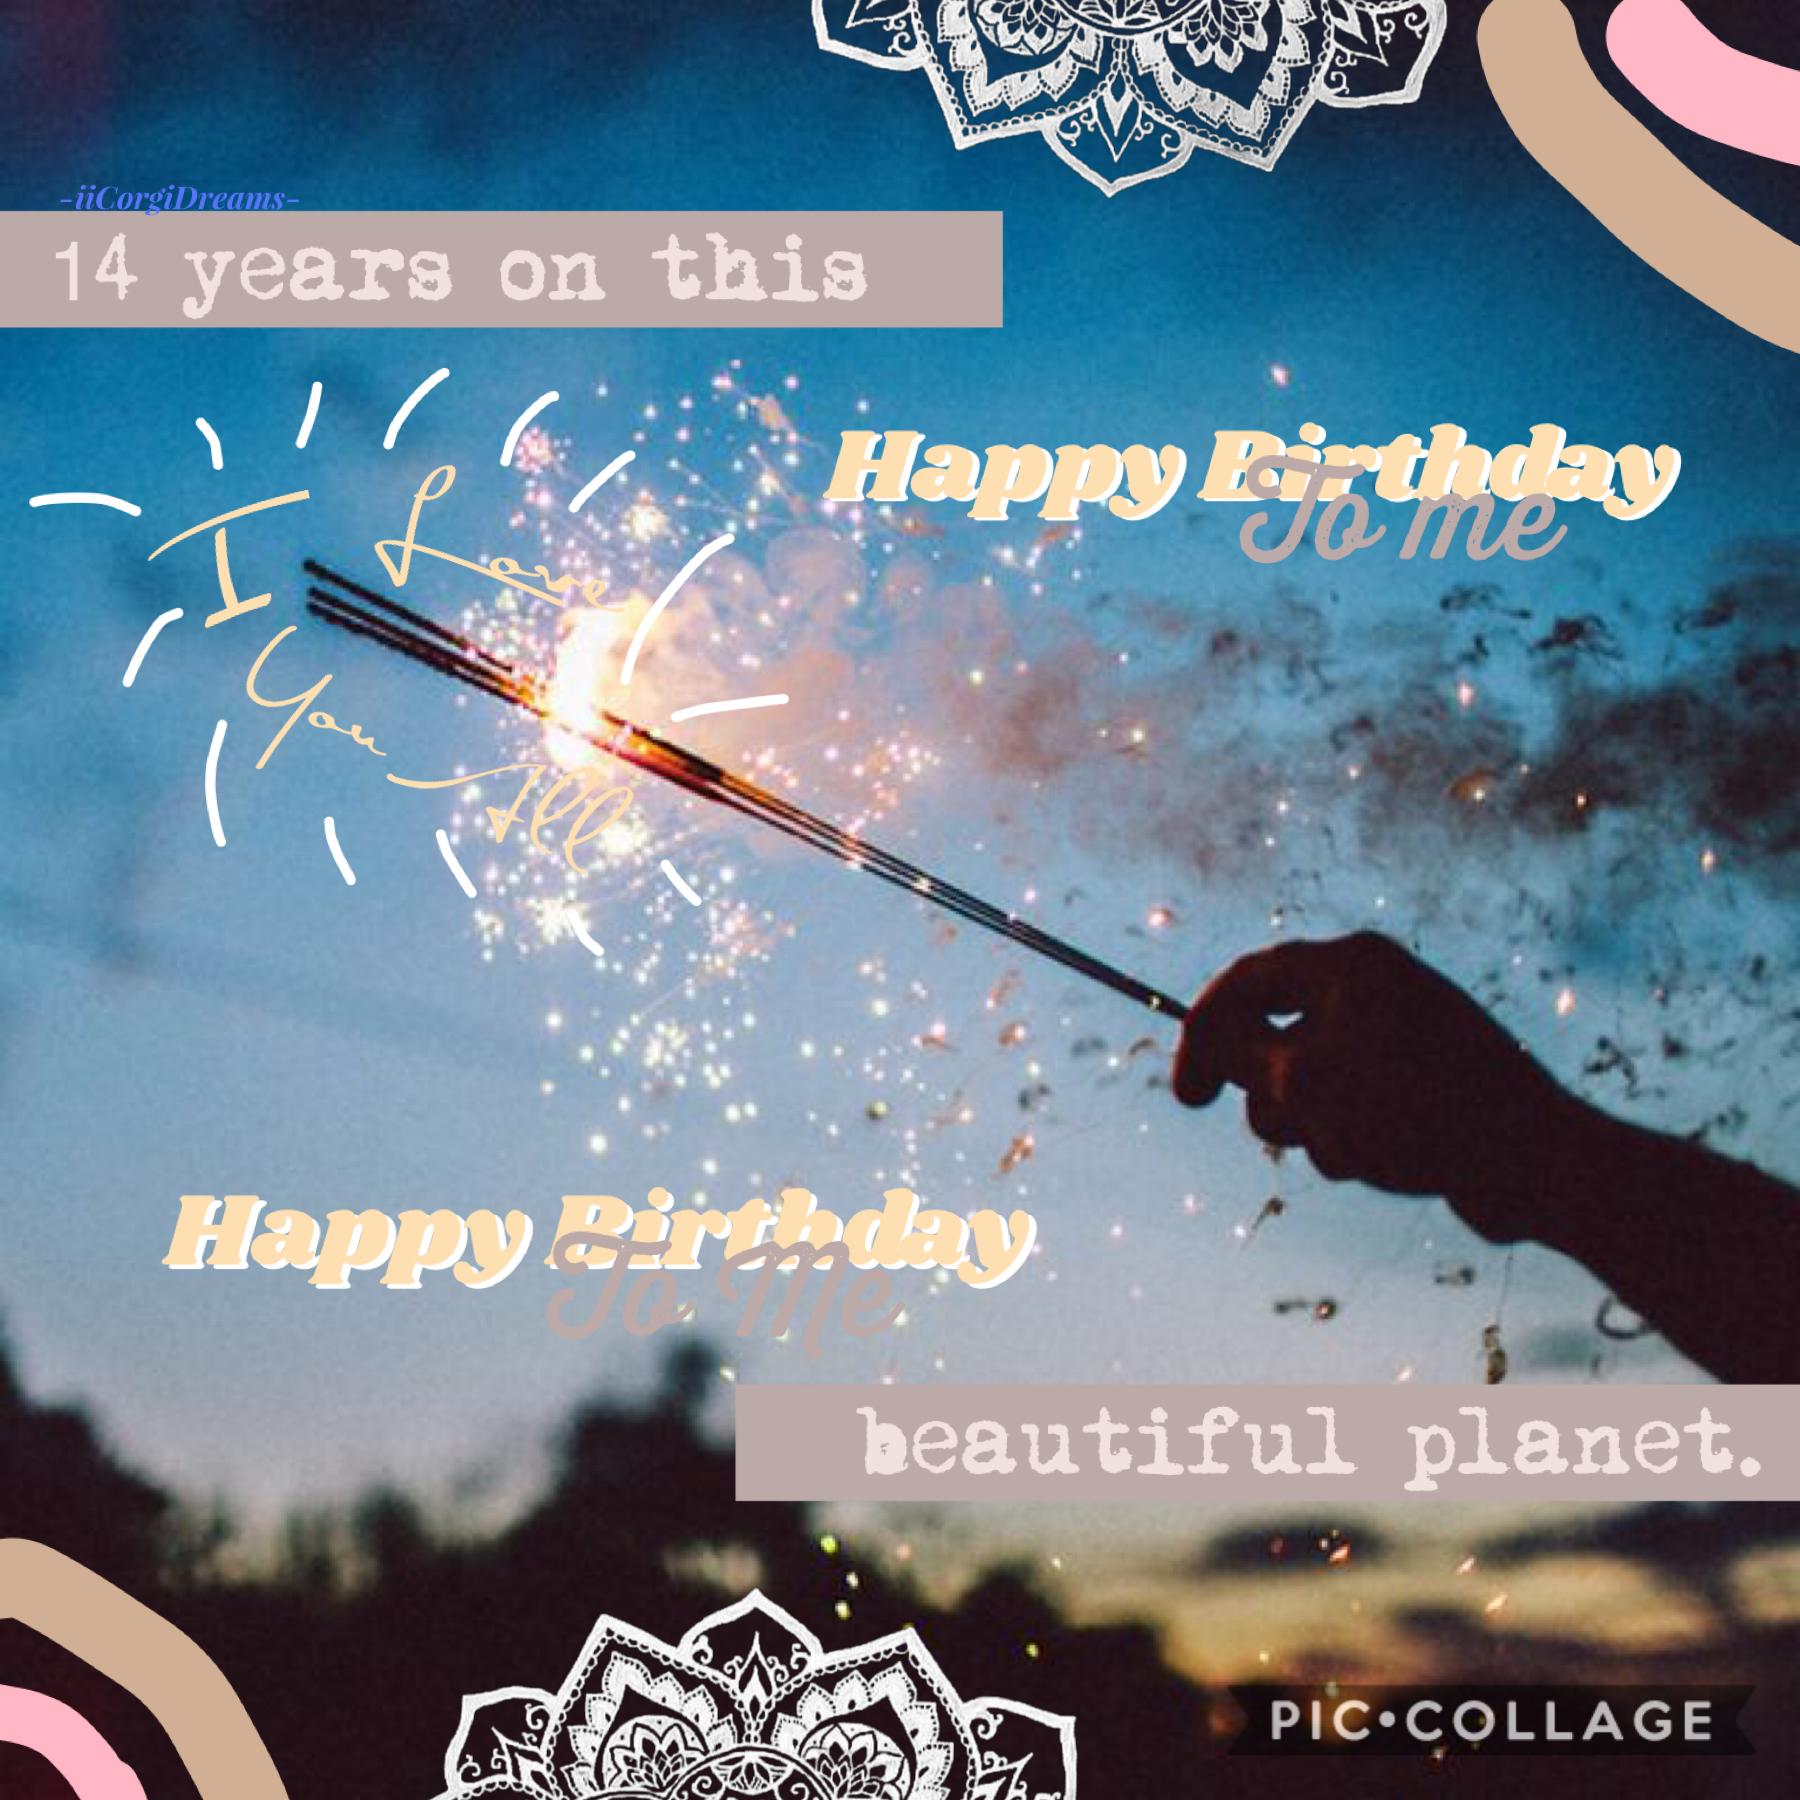 🎉 Tap 🎉
I hope you guys like this, lol, i threw it together. 
QOTC: How far away is your birthday? 
AOTC: It’s today! 🥳
gUeSs WhOs BiRtHdAy iS tOmOrRoW? 
expect a collage tomorrow you know who you are 😉 